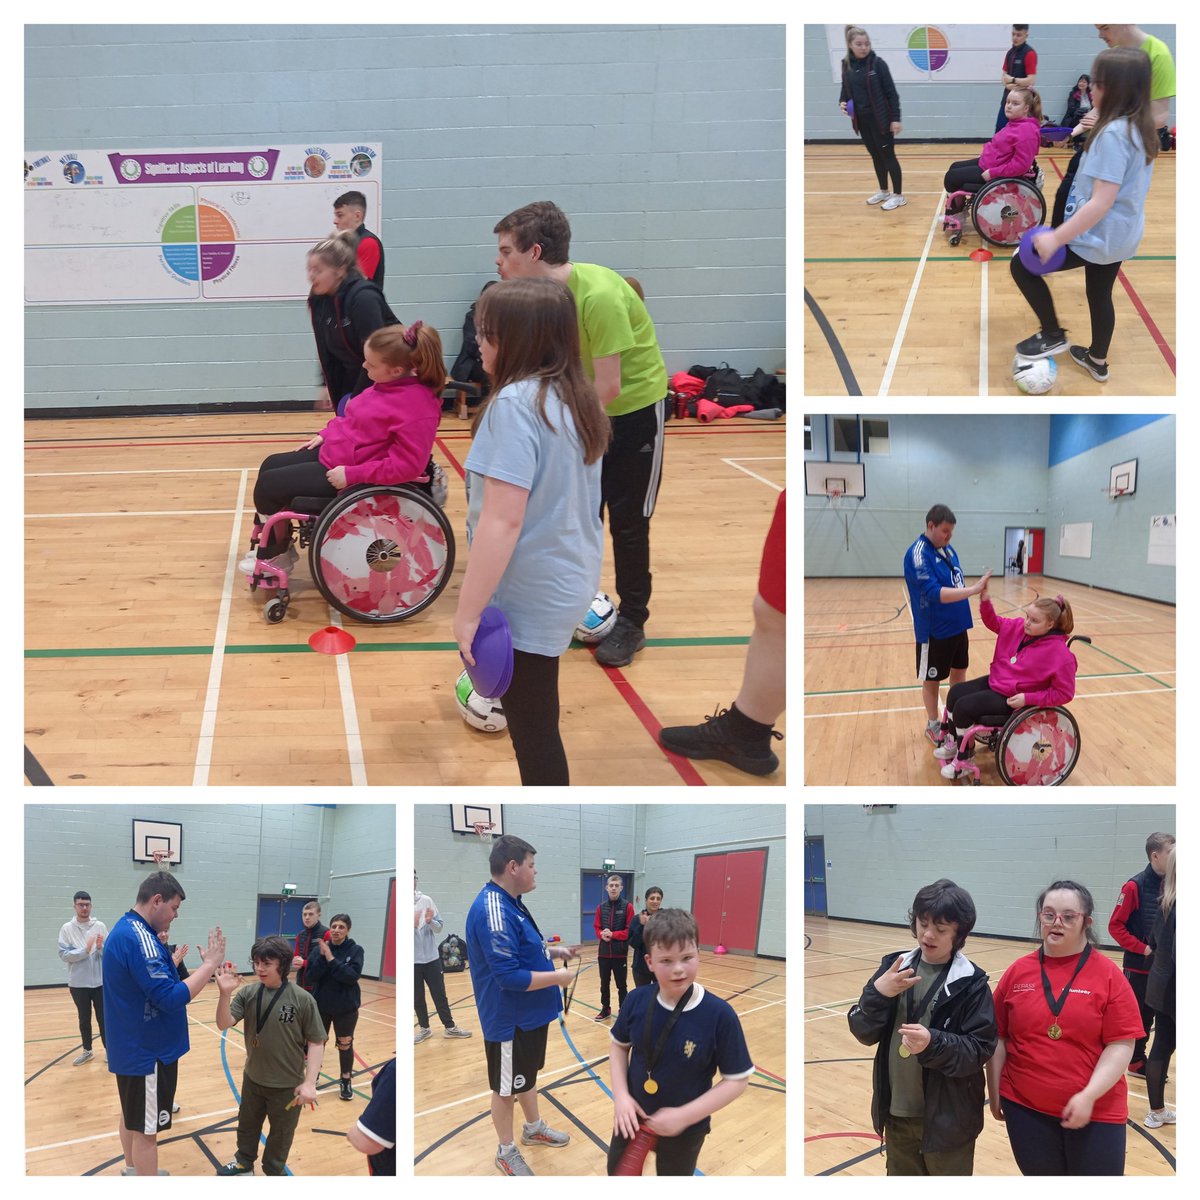 Day 1 done and dusted for today at our Asl inclusive holiday programme. A few snaps. Still spaces left . See earlier tweets. Just turn up. @PEPASSGlasgow @Doug_GCC @Baker_GCC @activeschoolsFK @ActiveSchoolsAH